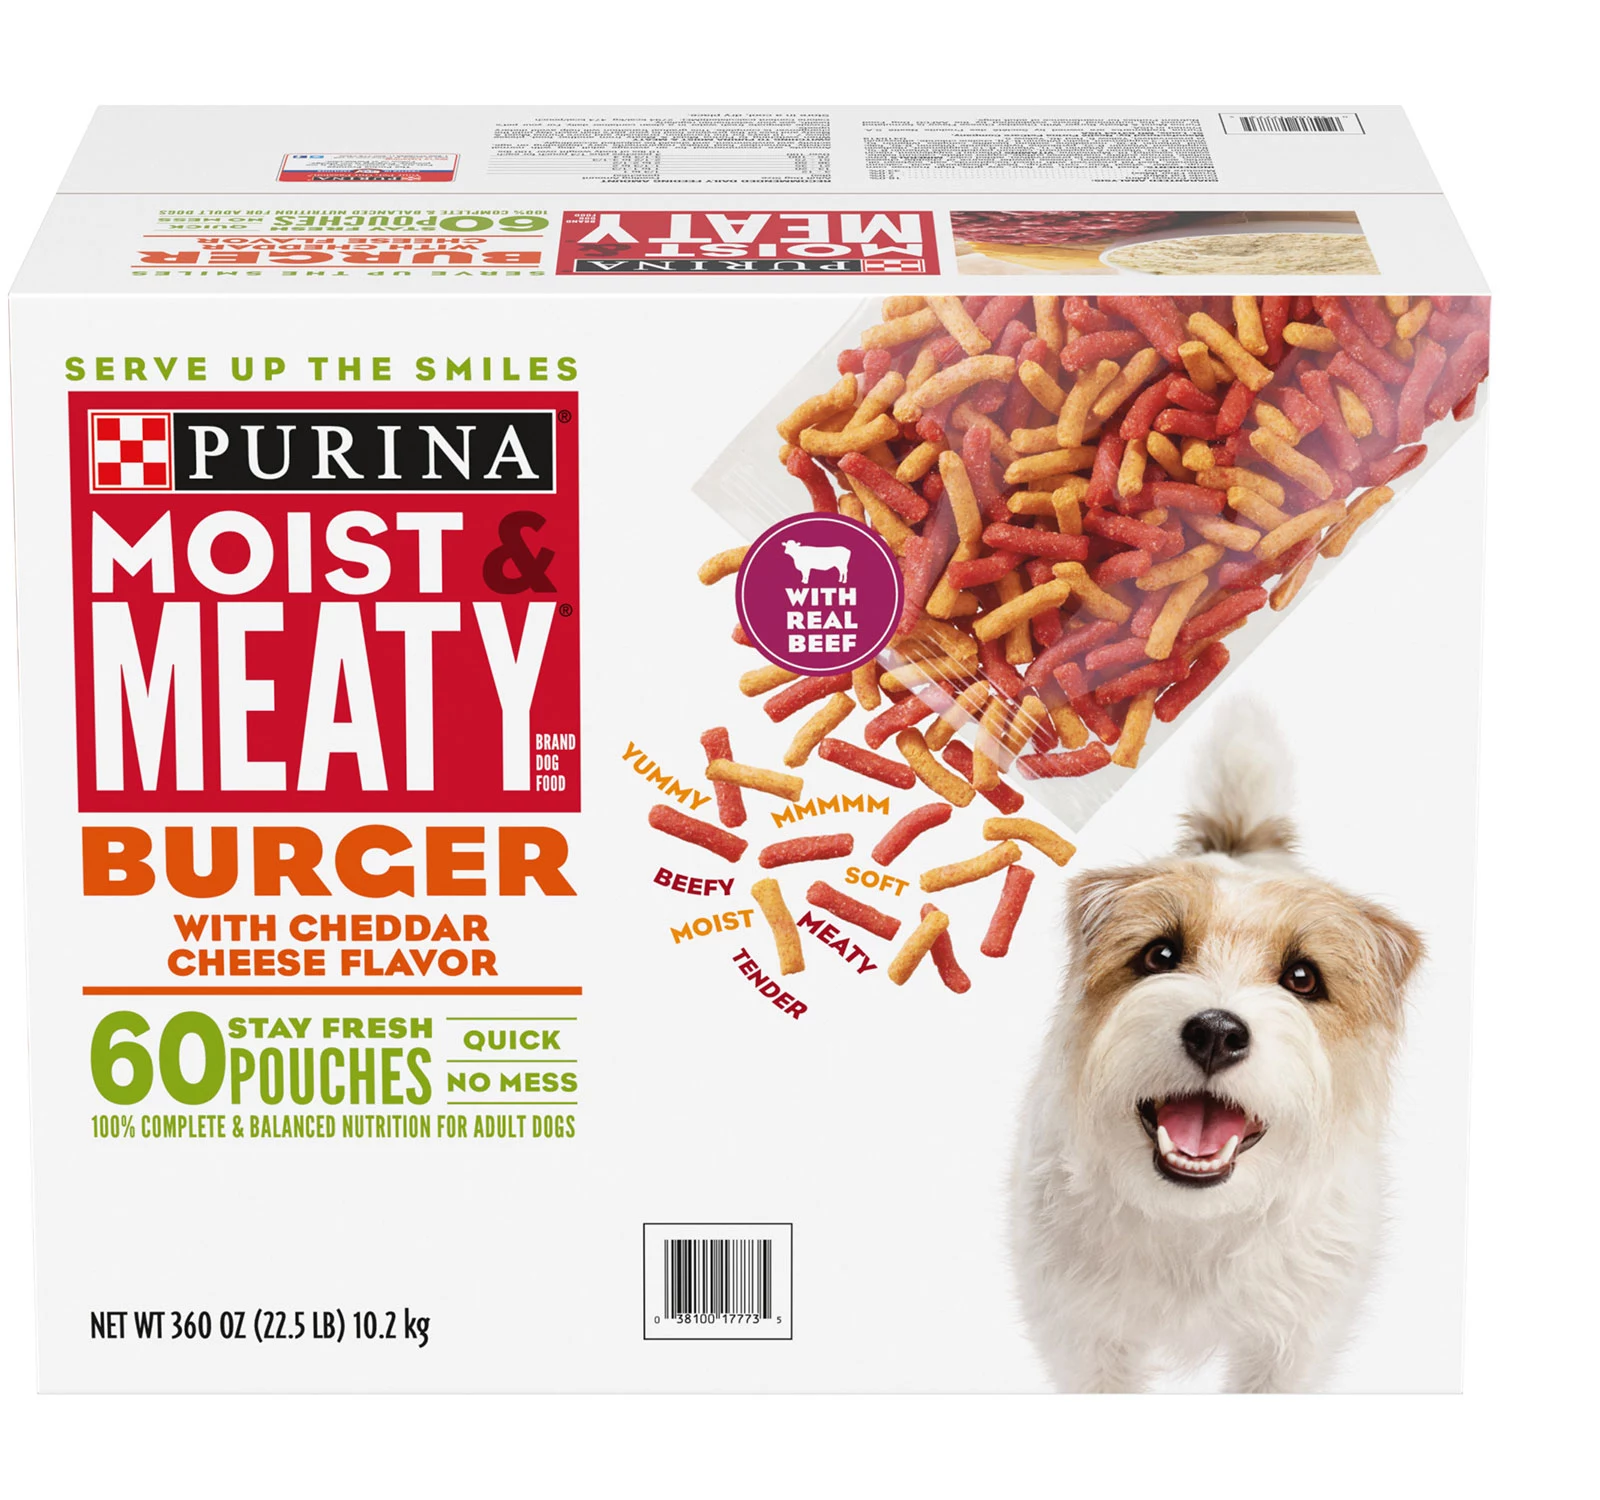 Purina Moist & Meaty Dog Food, Burger with Cheddar Cheese Fl